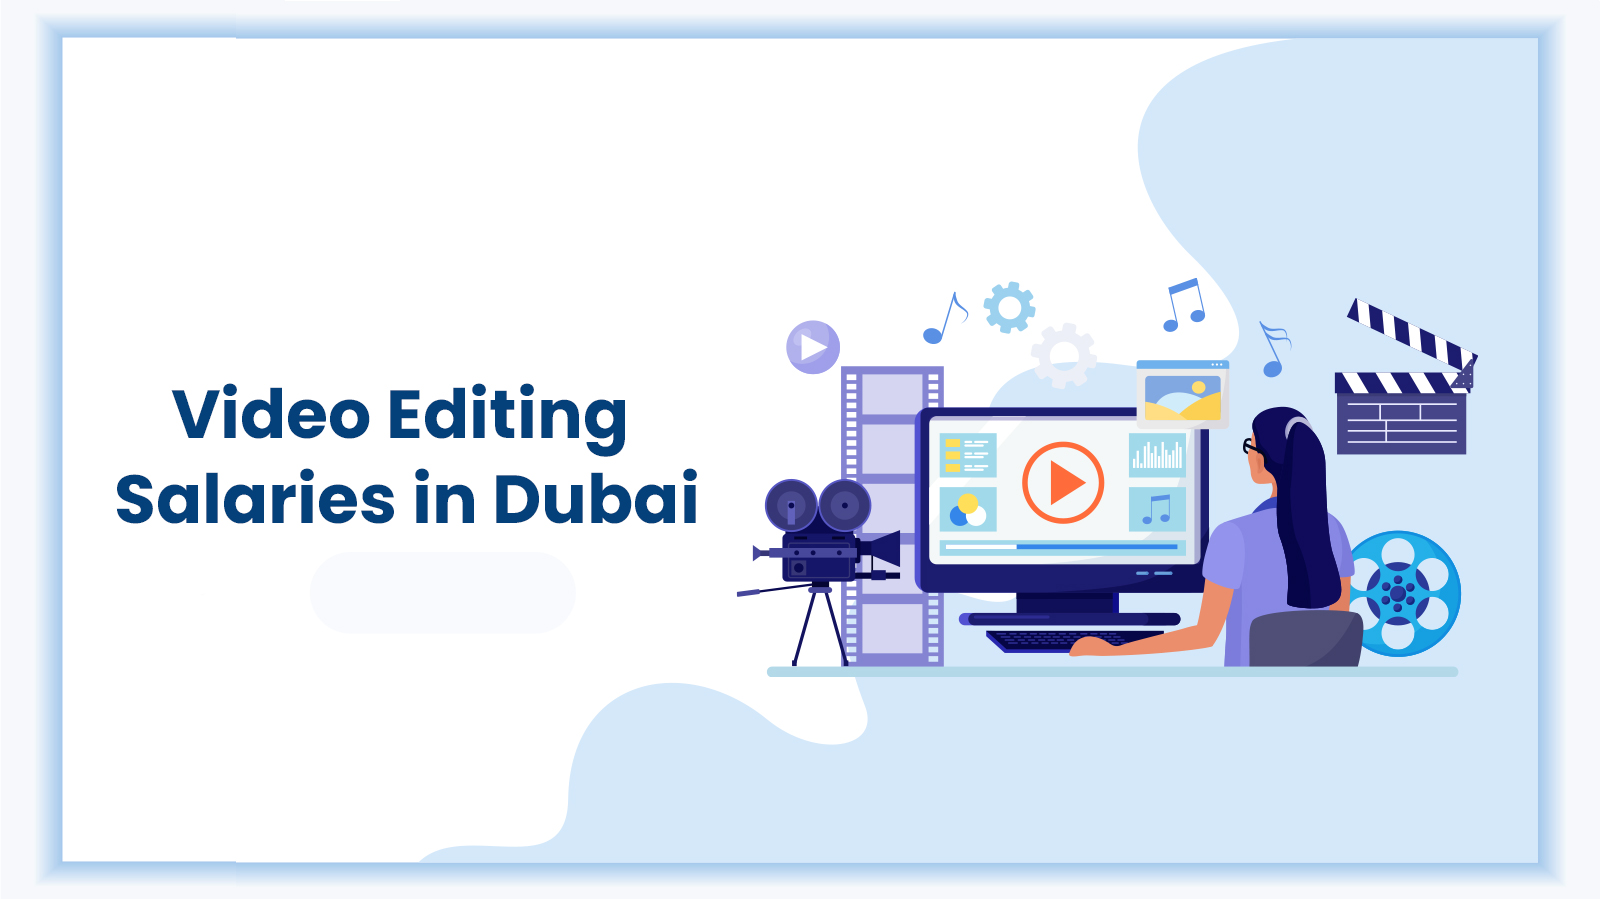 Feature Image of the blog - Video Editing Salaries in Dubai